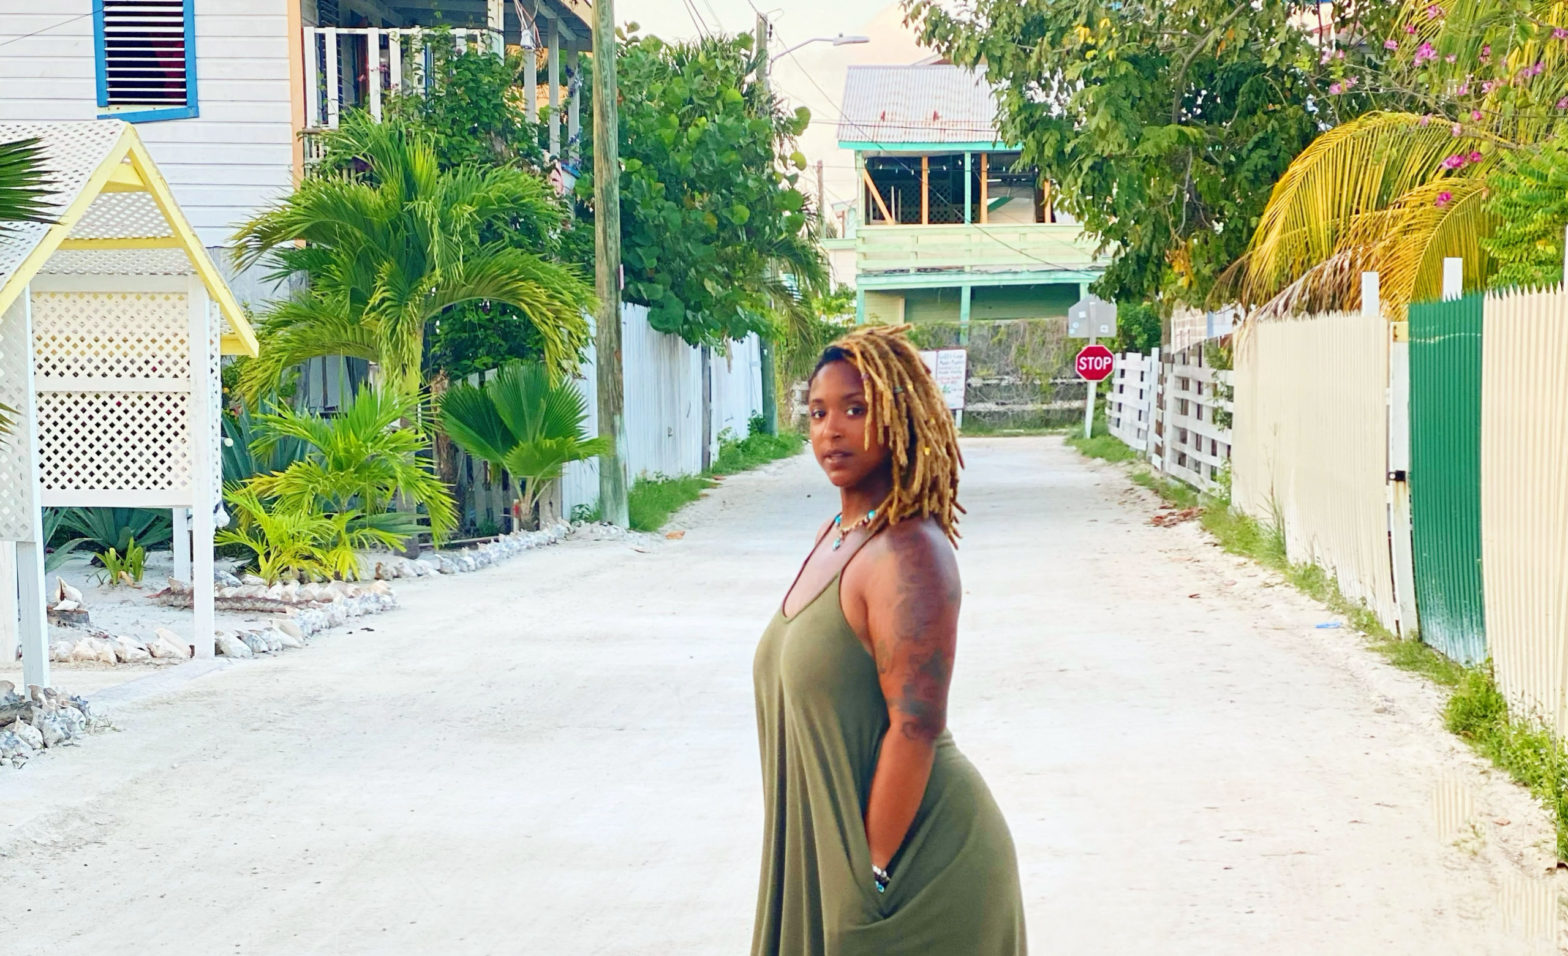 The Black Expat: "In Caye Caulker, Belize We Can Live Our Most Joyful, Authentic Lives"